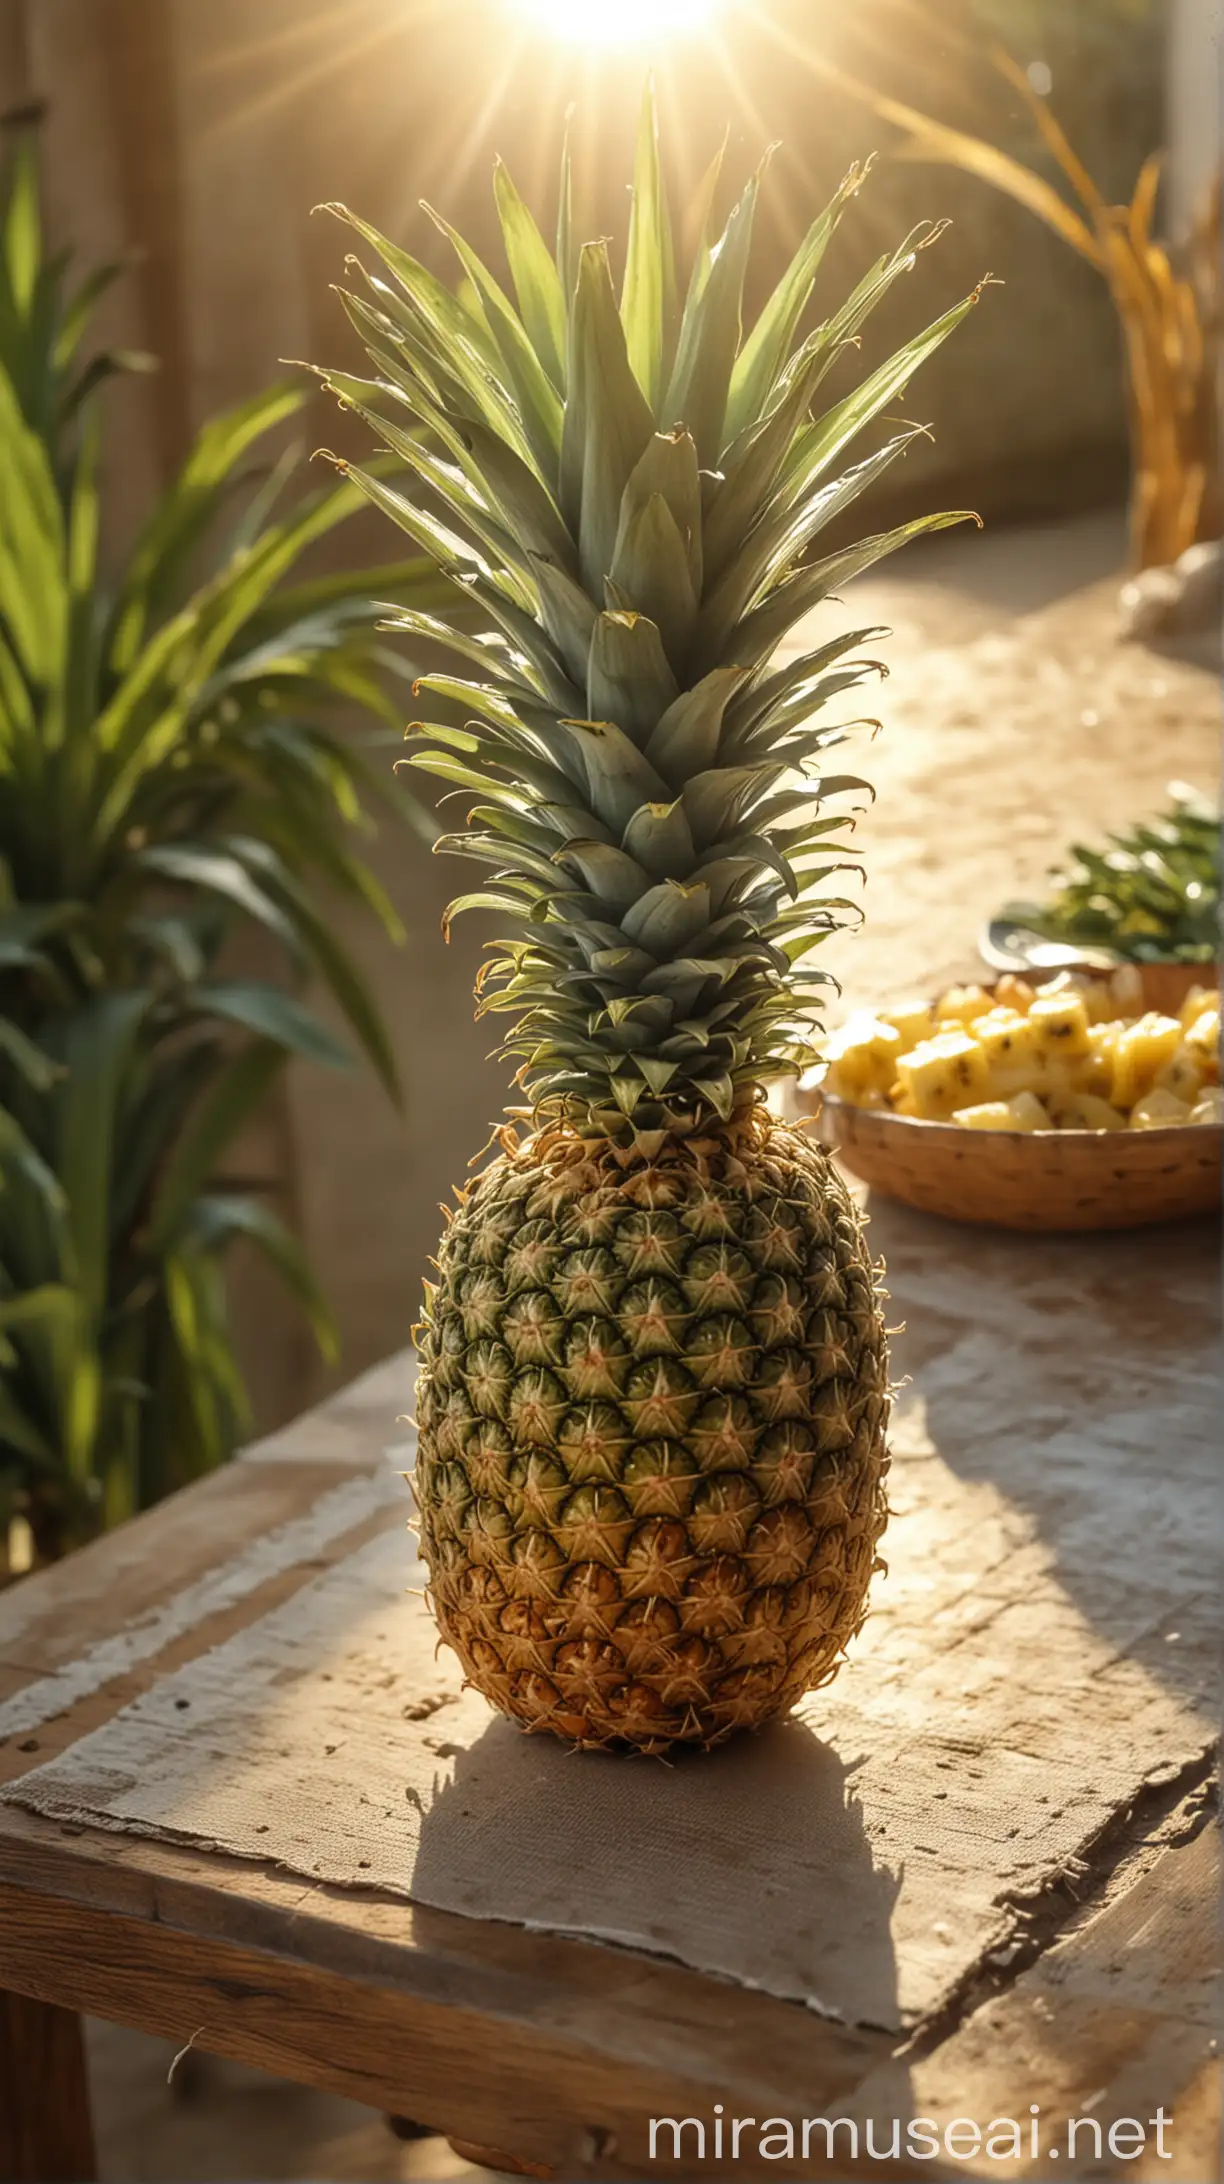 Pineapple on beautiful table, natural background, sun light effect, 4k, HDR, morning time weather